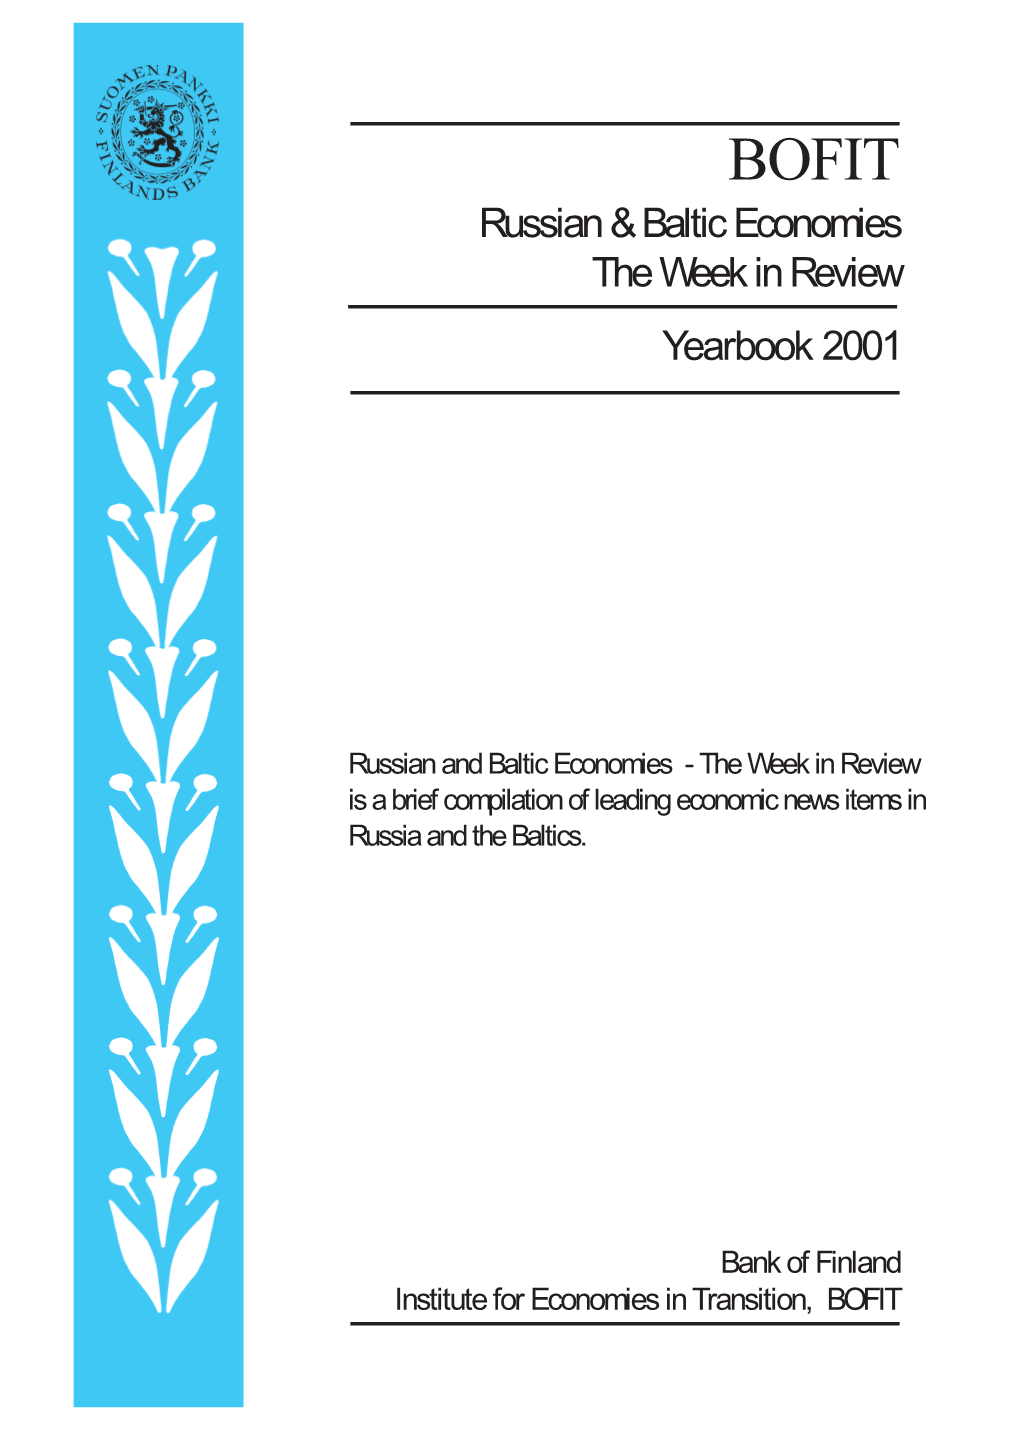 Russian and Baltic Economies - the Week in Review Is a Brief Compilation of Leading Economic News Items in Russia and the Baltics